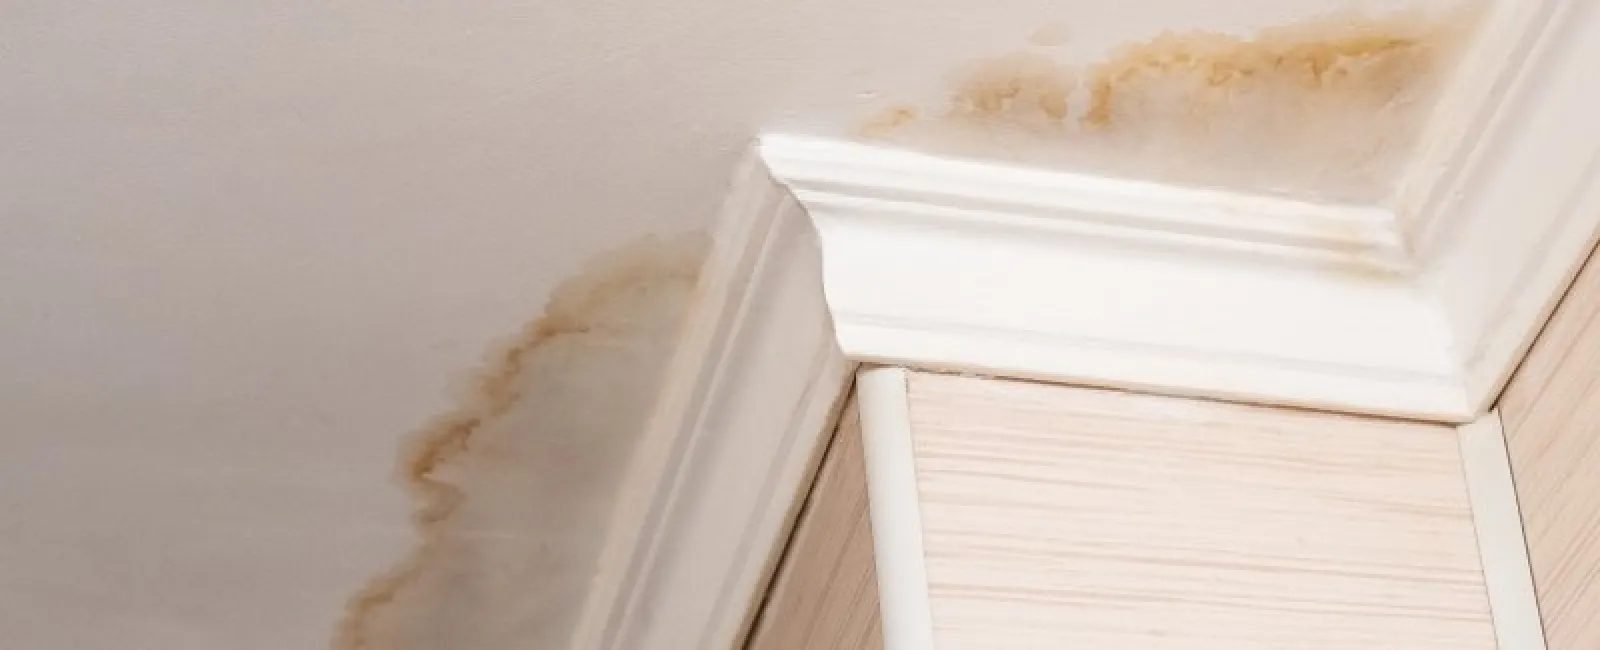 Leaky Roof? Now What?